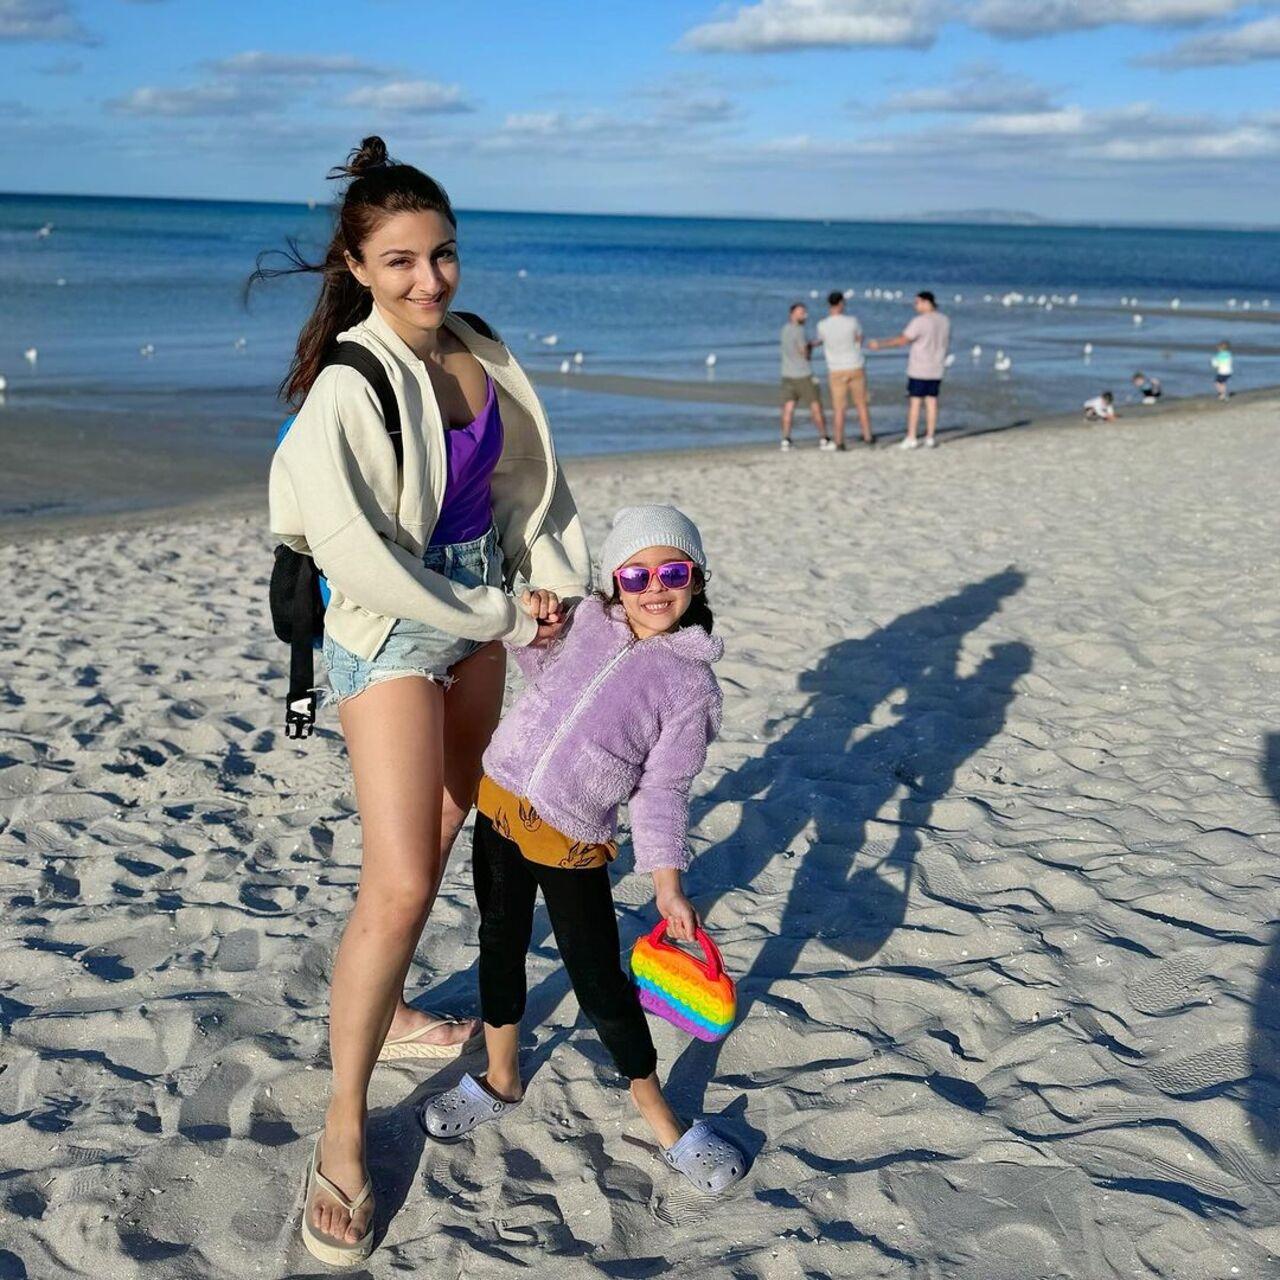 What's a holiday without a day out on the beach? Soha and Inaaya pose together on a sunny day at the beach on a winter afternoon. Owing to the cold, Inaaya was layered in a  purple furry jacket with black pants